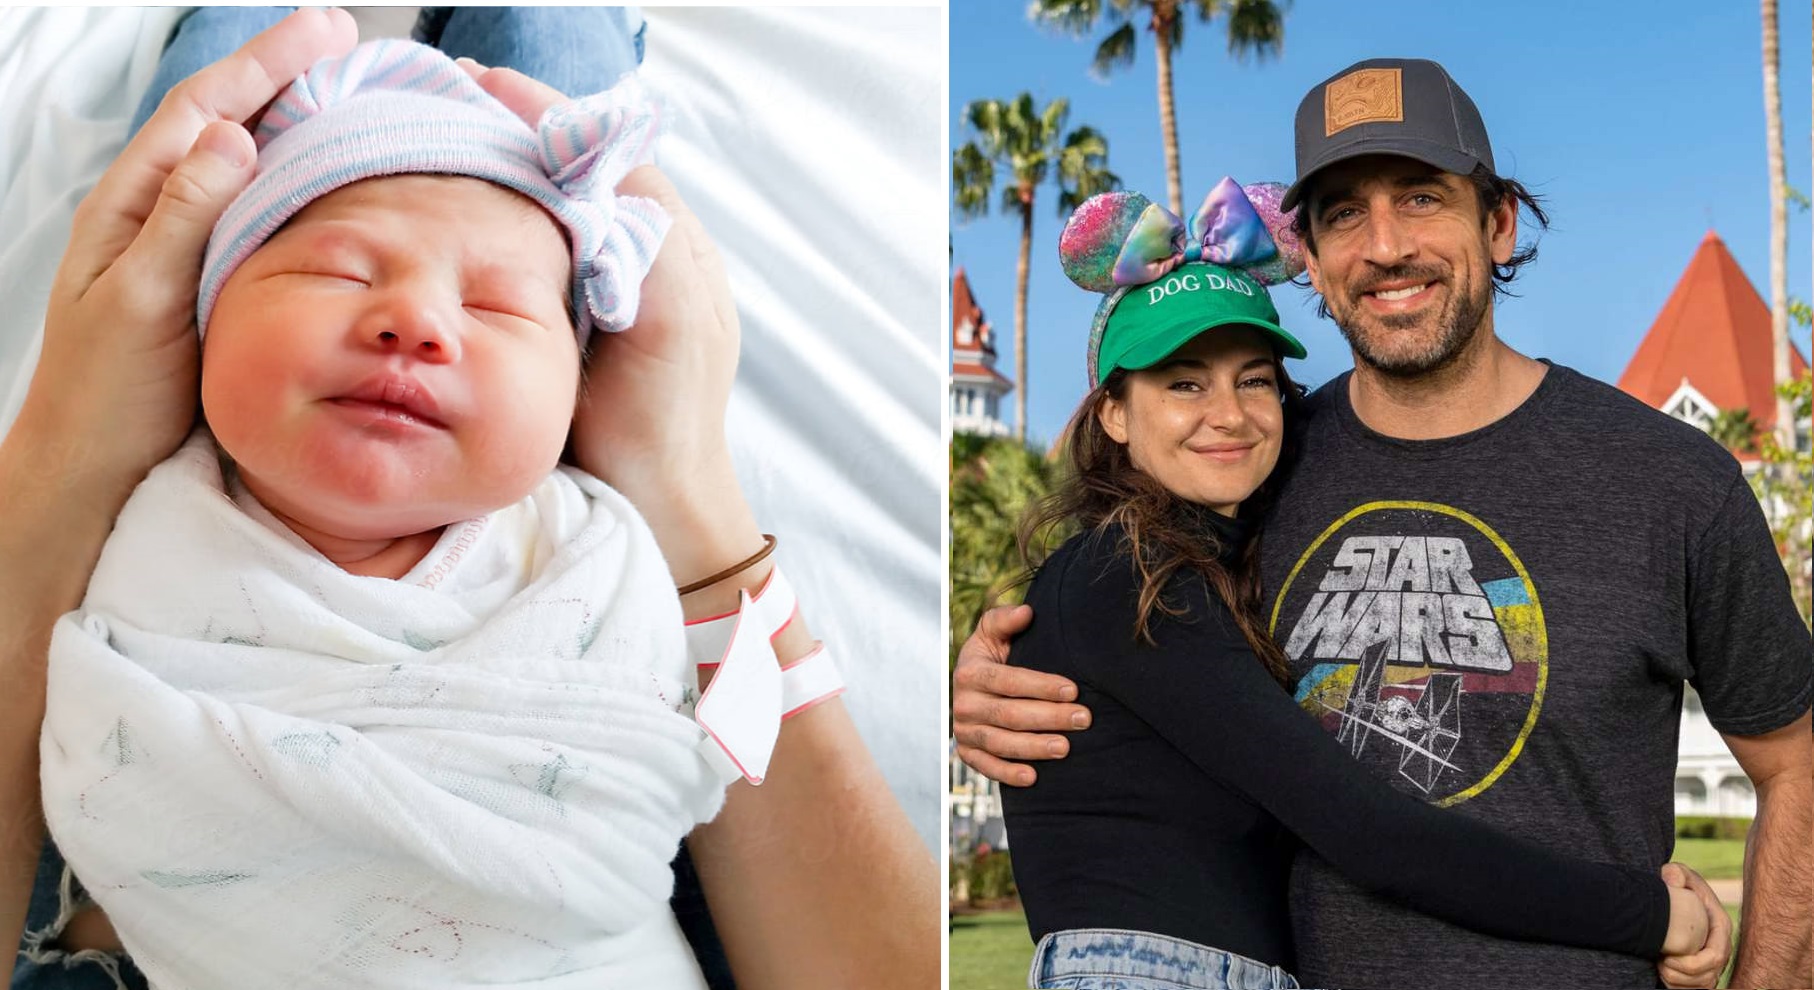 "At 40, fatherhood was unexpected!" Jets' Aaron Rodgers exclaimed tearfully, as he and wife Shailene welcomed their first baby with overwhelming joy.